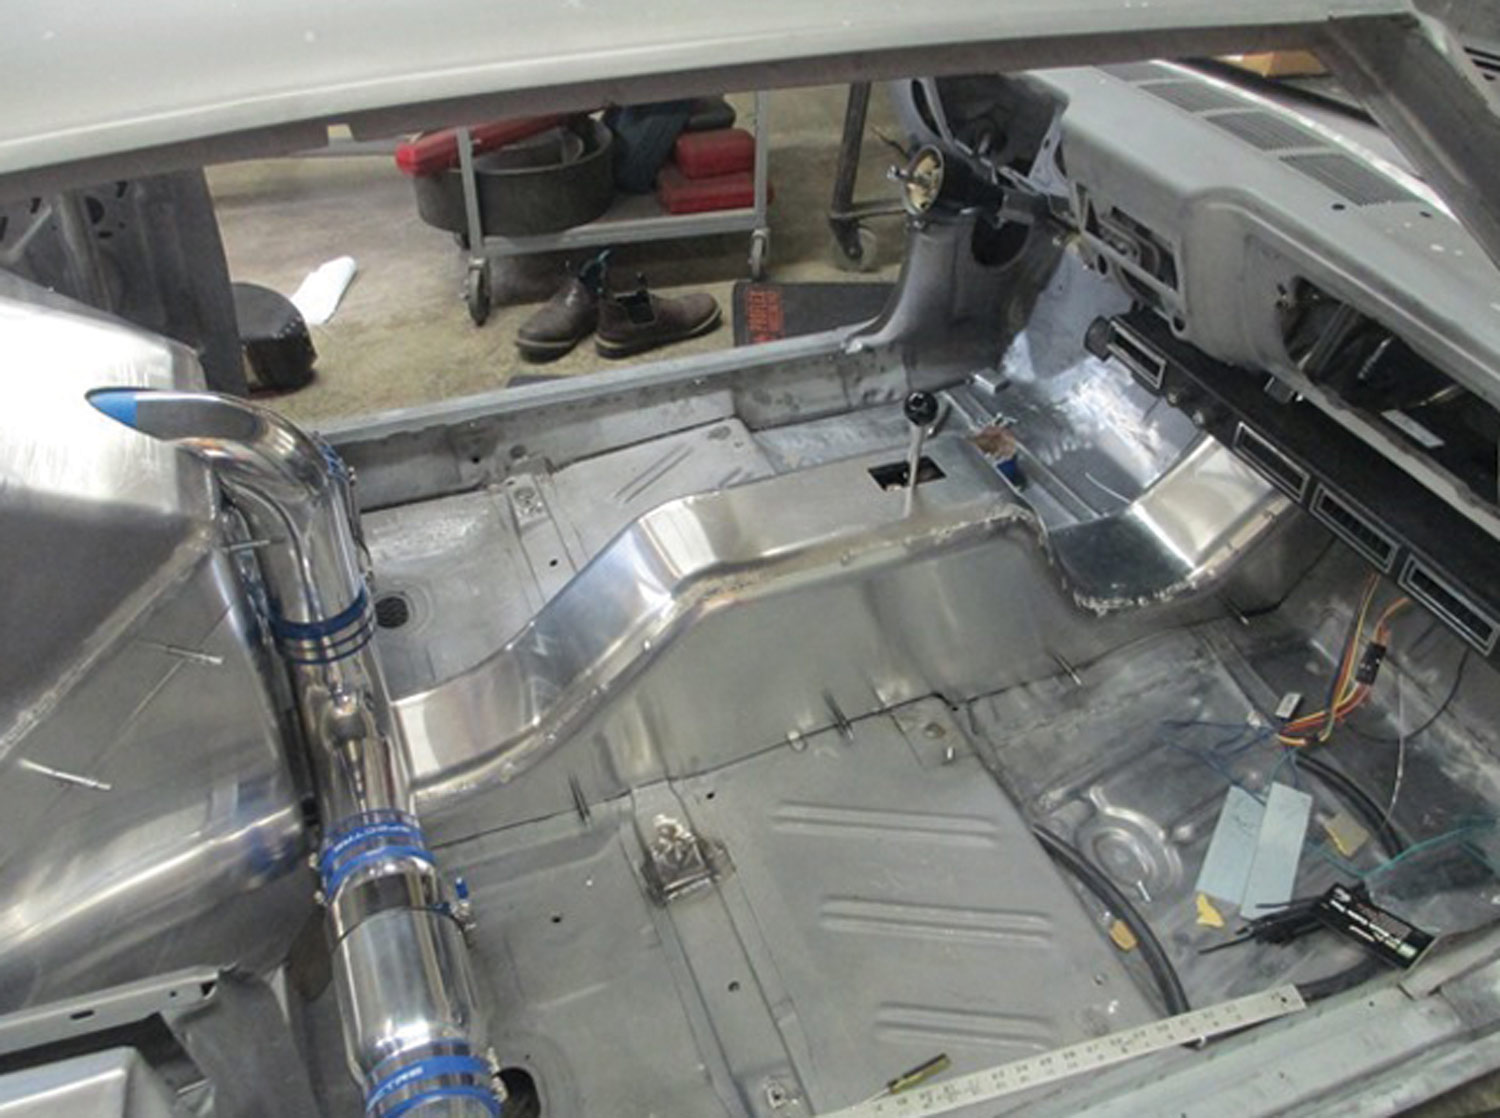 view of the custom center console that houses the Patrick Motorsports shifter assembly